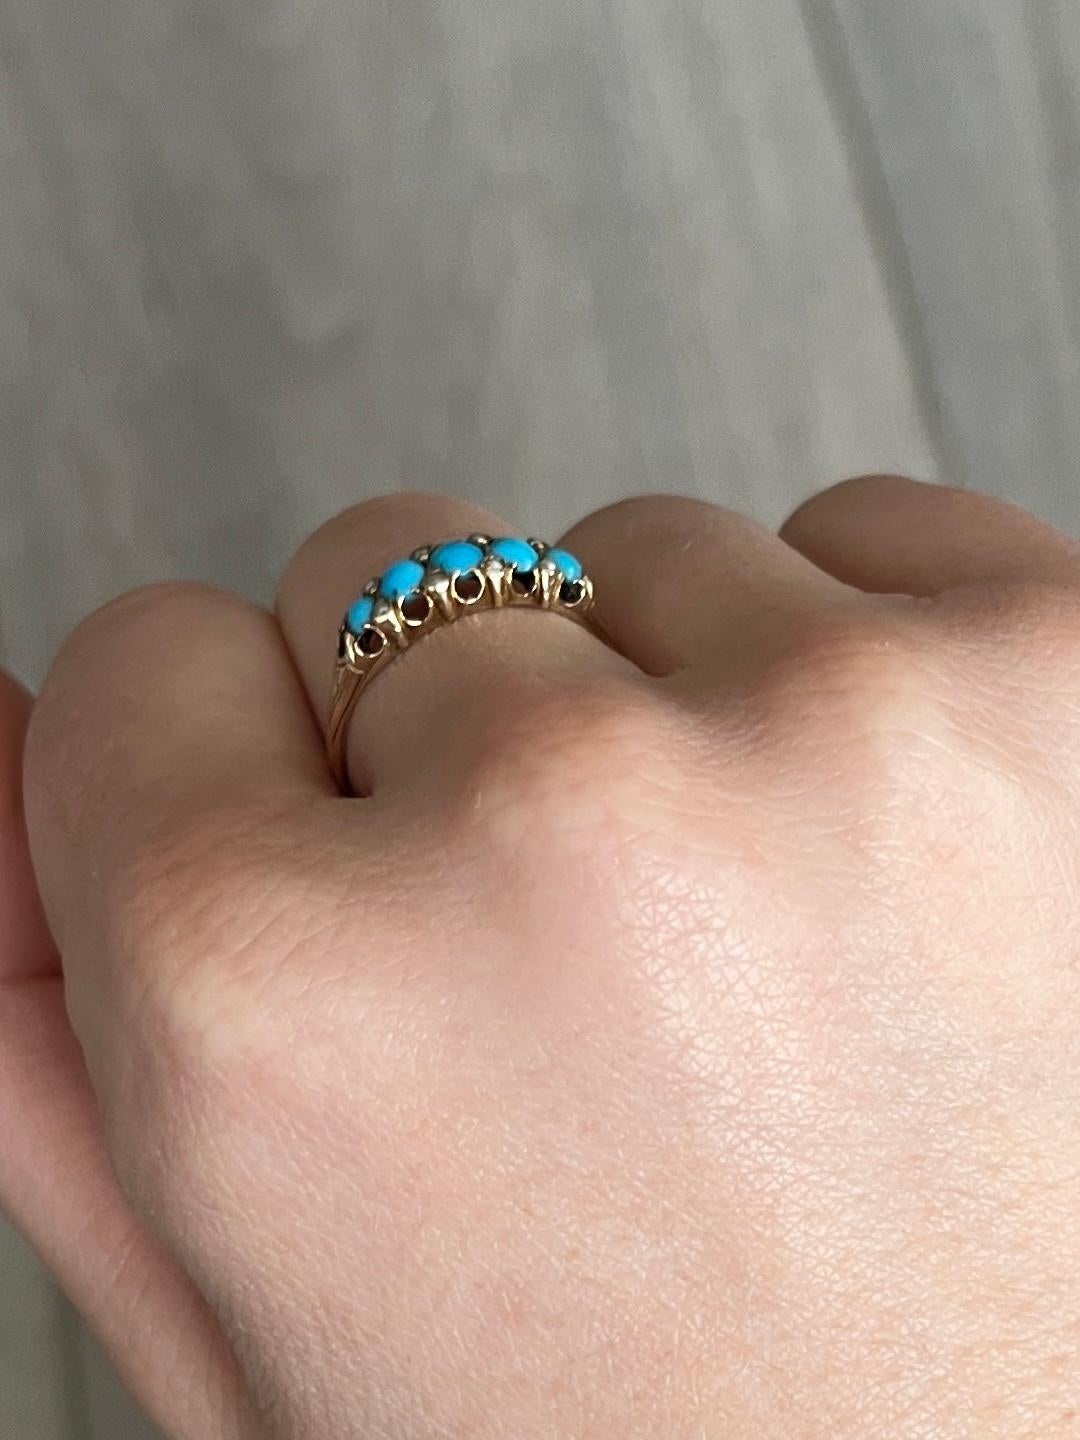 A spectacular five-stone ring. Set with five wonderful cabochon cut turquoise with pearl points in between. Modelled in 15 carat yellow gold.

Ring Size: P 1/2 or 8 
Band Width: 5.5mm
Height Off Finger: 4mm

Weight: 1.9g